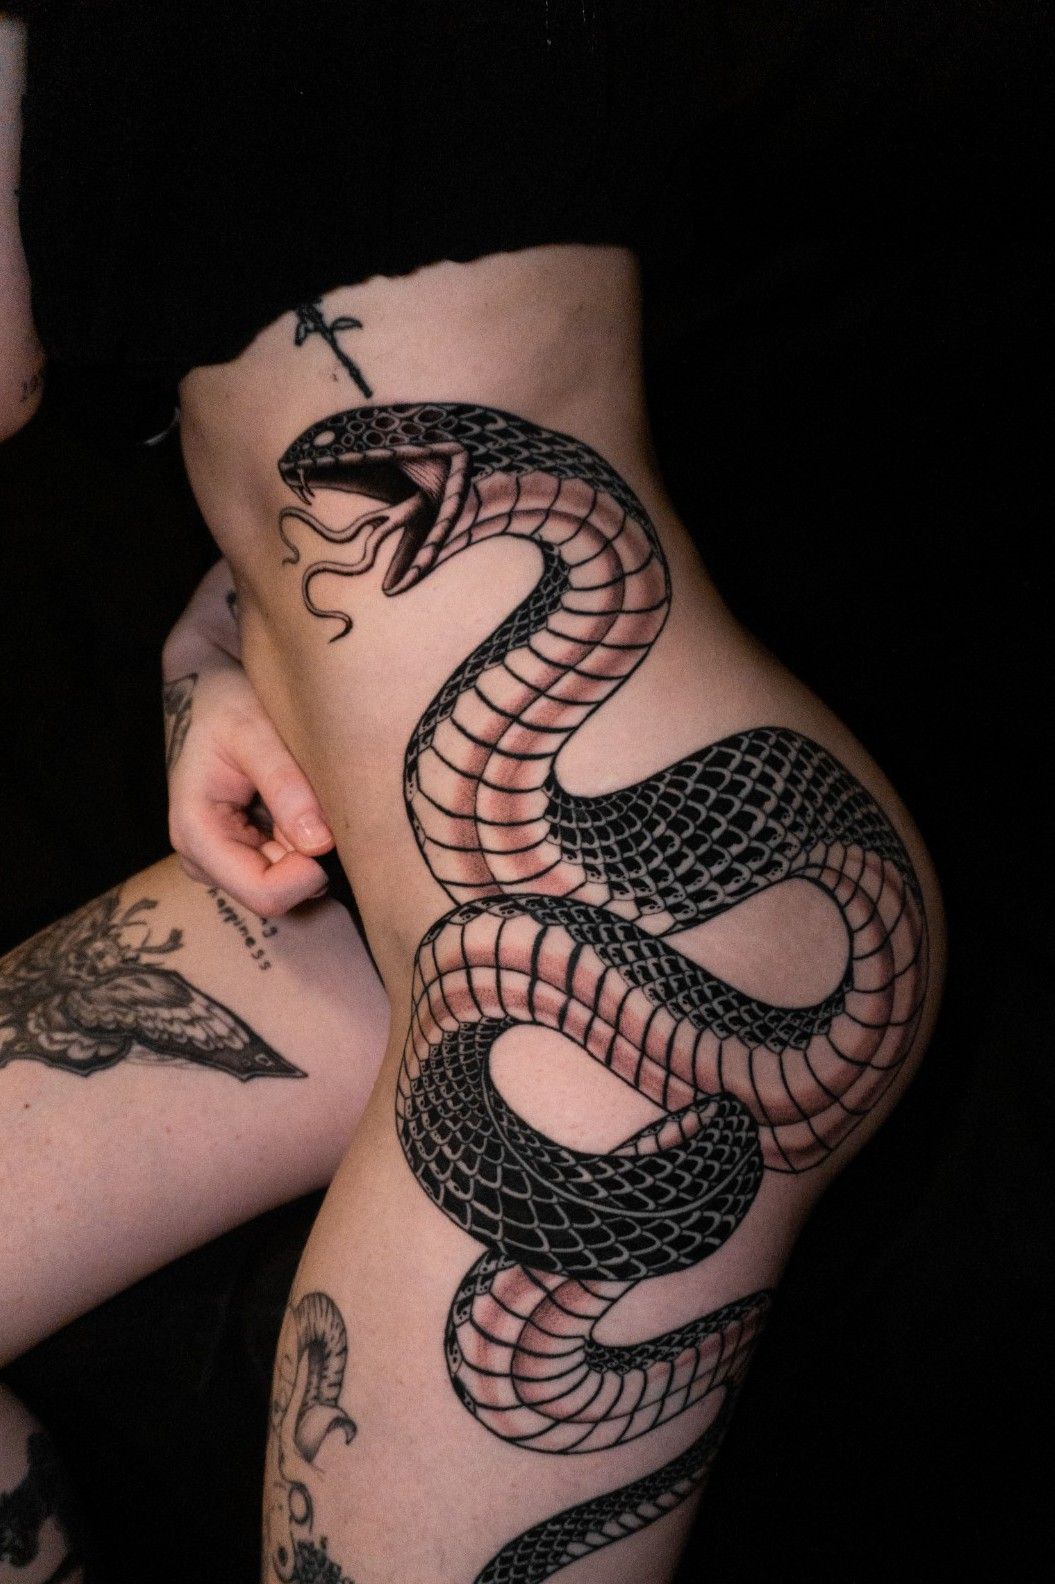 Theres a snake in my boot  Album on Imgur  Snake tattoo Leg tattoos  Trendy tattoos